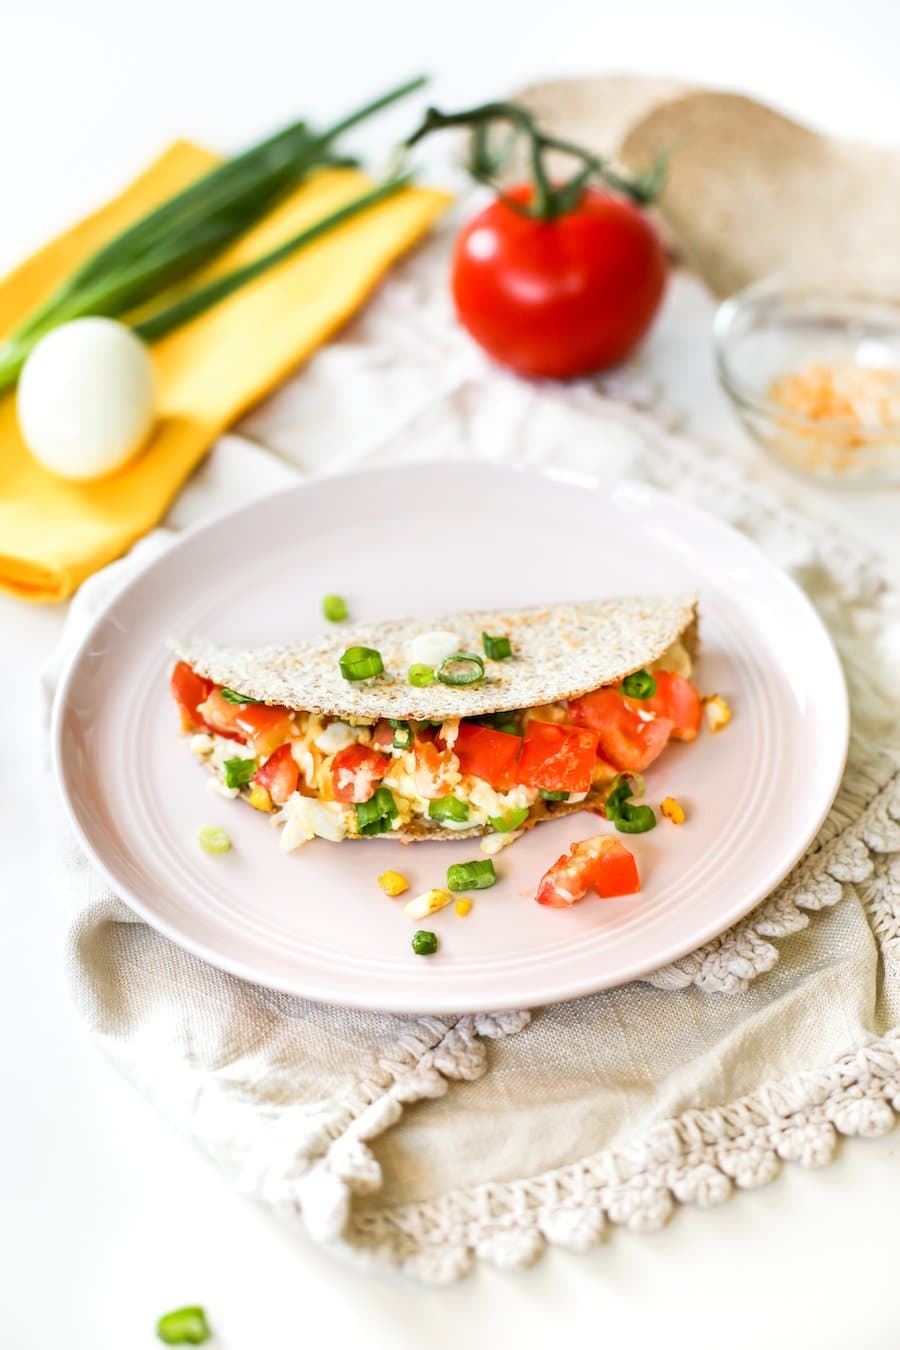 A hard boiled egg quesadilla on a pink plate atop a cream-colored towel with ingredients surrounding the plate including chopped green onions, a hard boiled egg, a whole tomato, and some cheese in a bowl